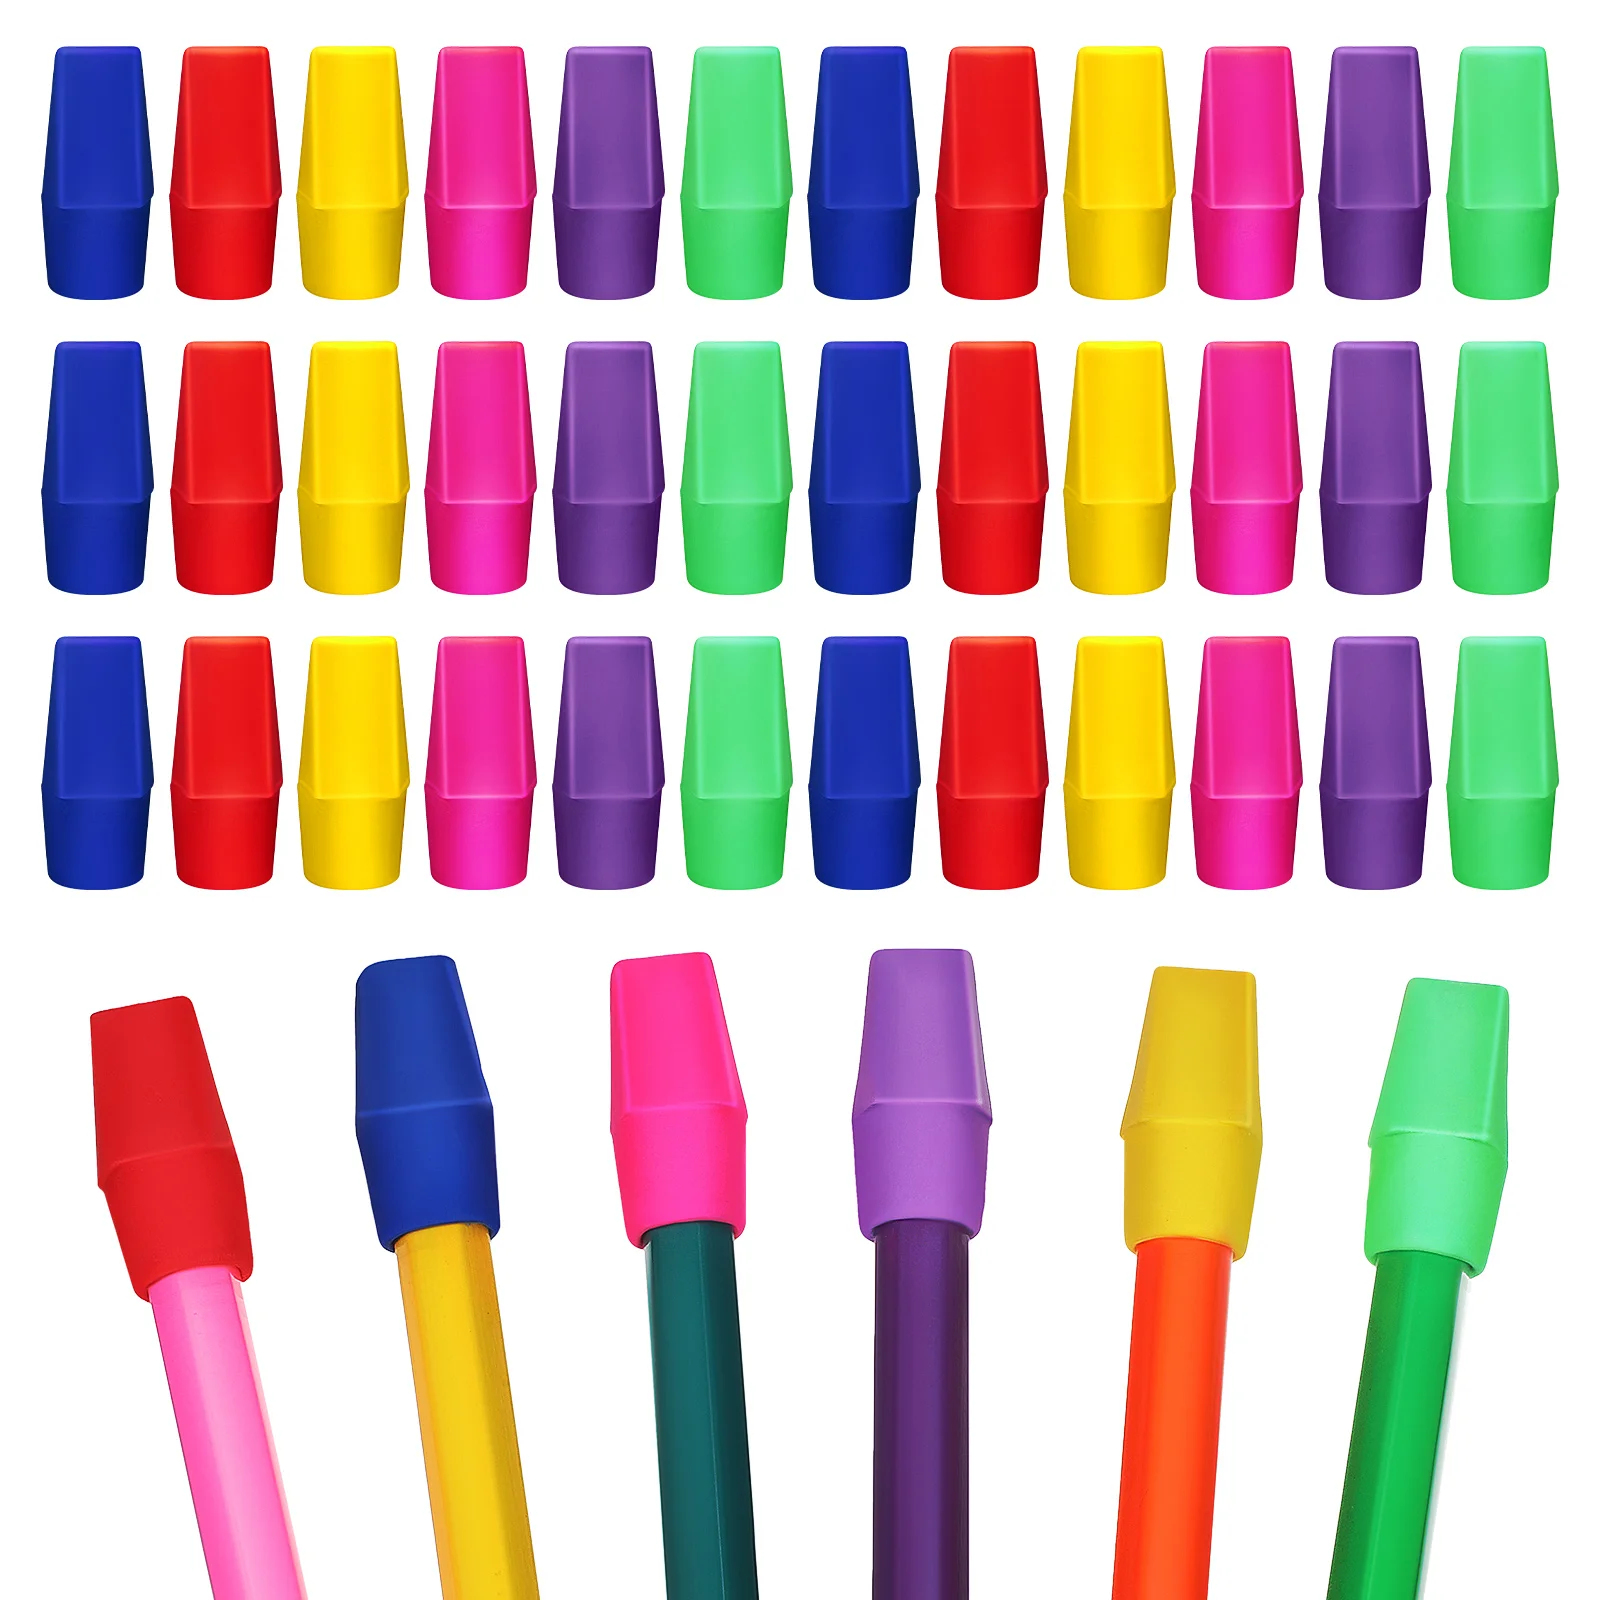 

120Pcs Cap Erasers Toppers Mixed Color Top Erasers Stationery Supplies for Teachers